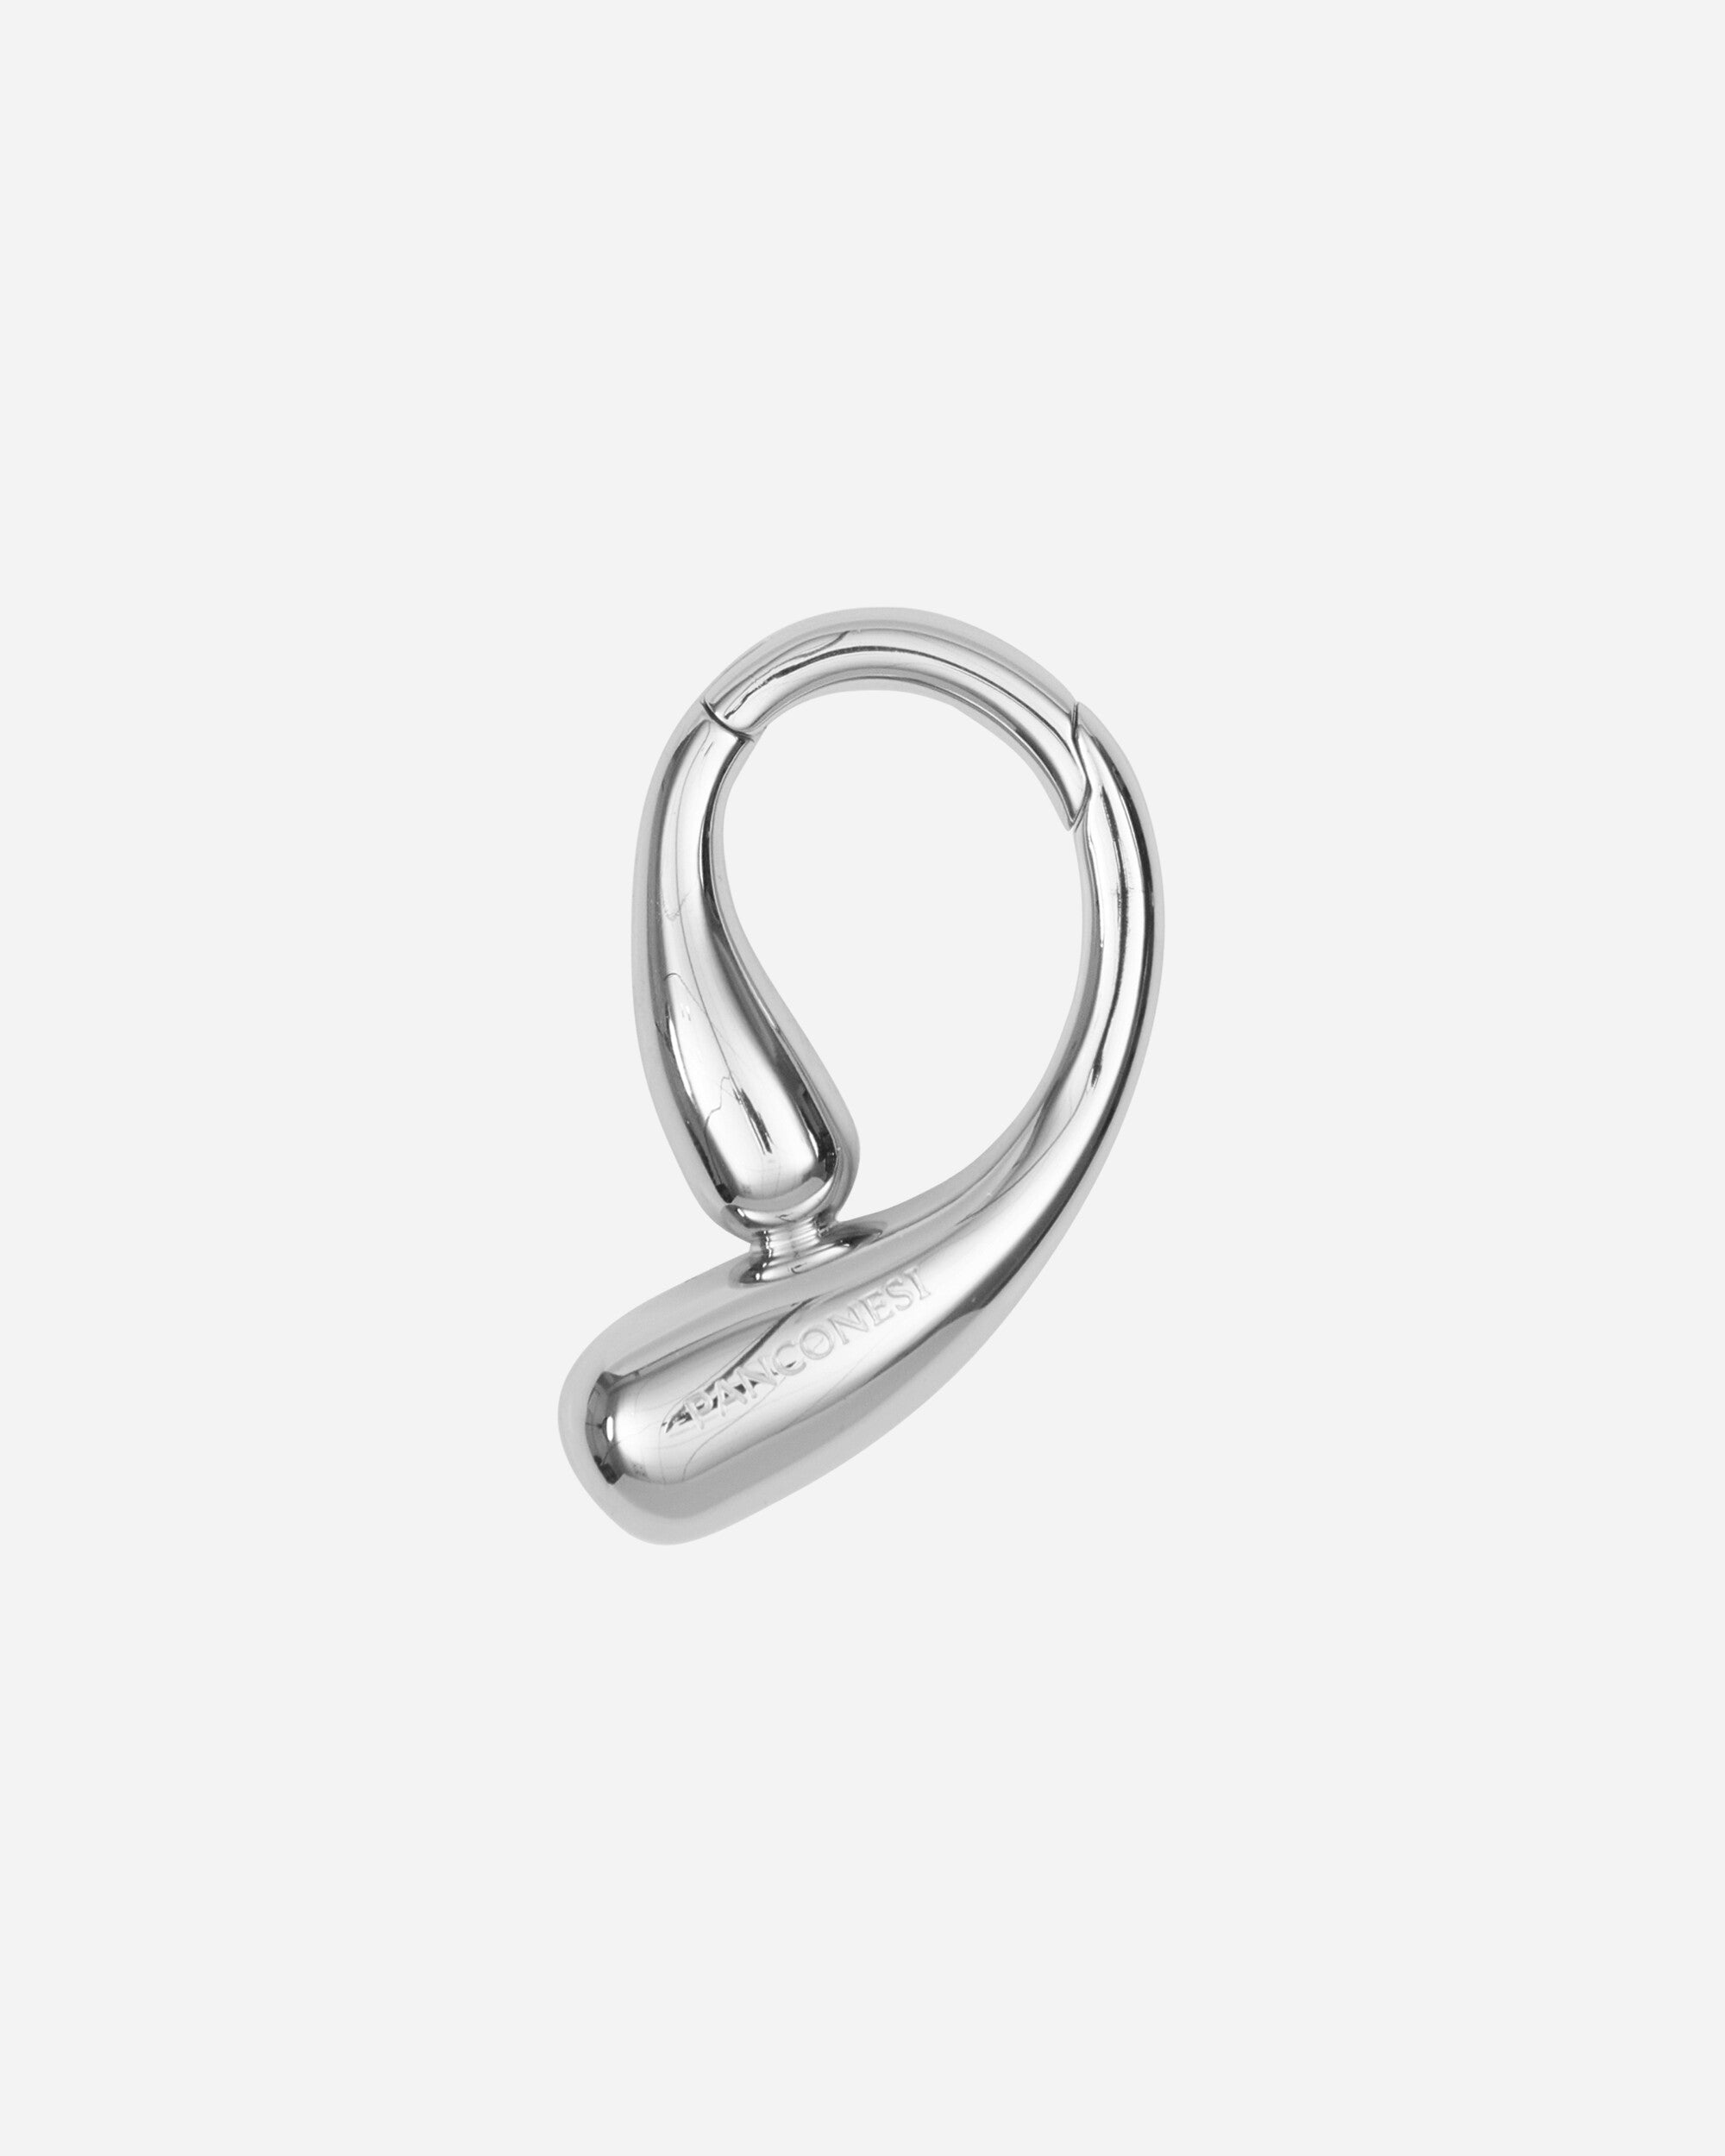 Panconesi P Carabiner Silver Small Accessories Keychains AC003 S